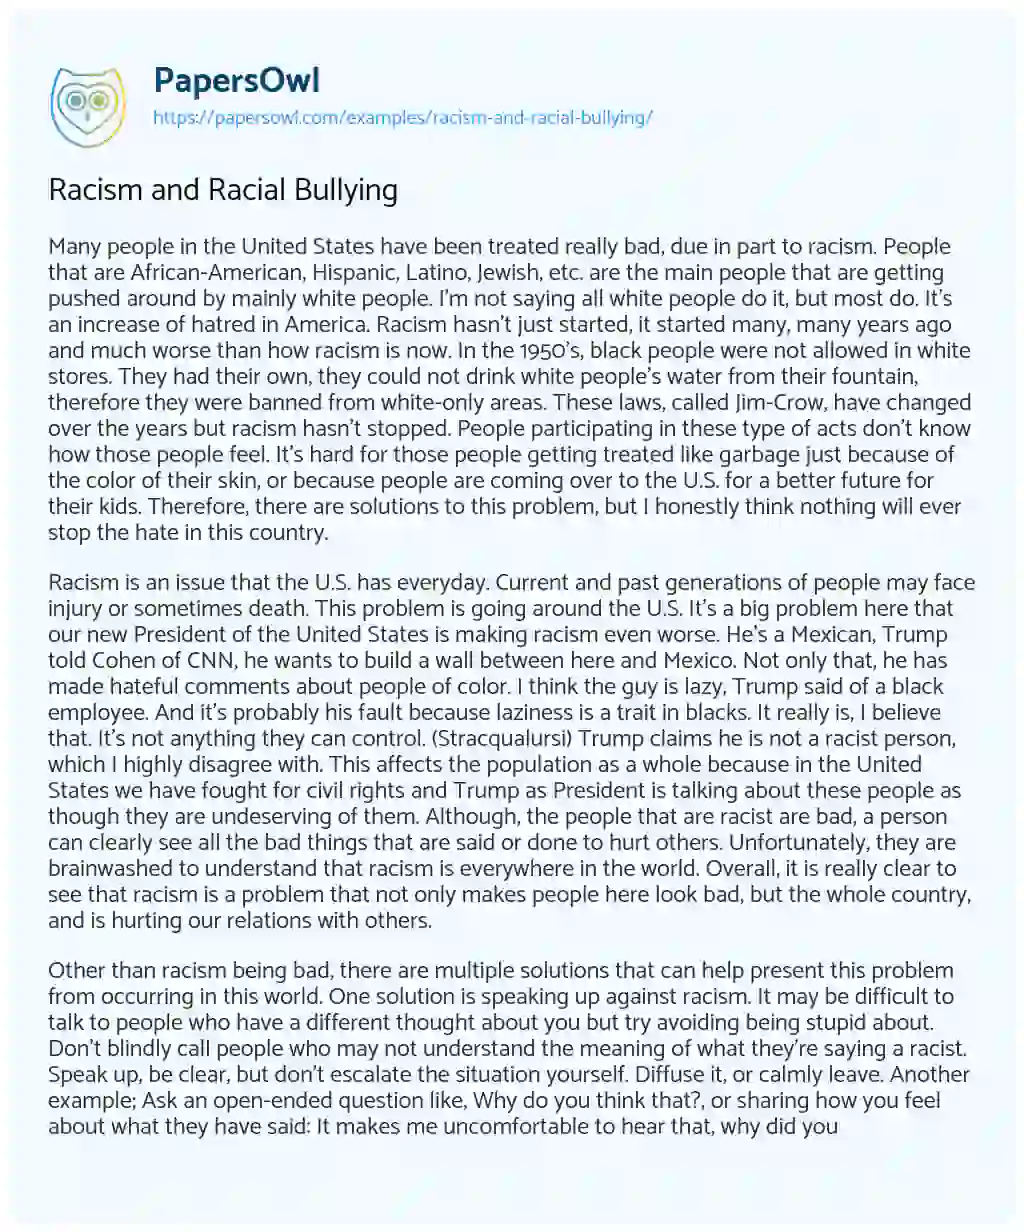 Essay on Racism and Racial Bullying